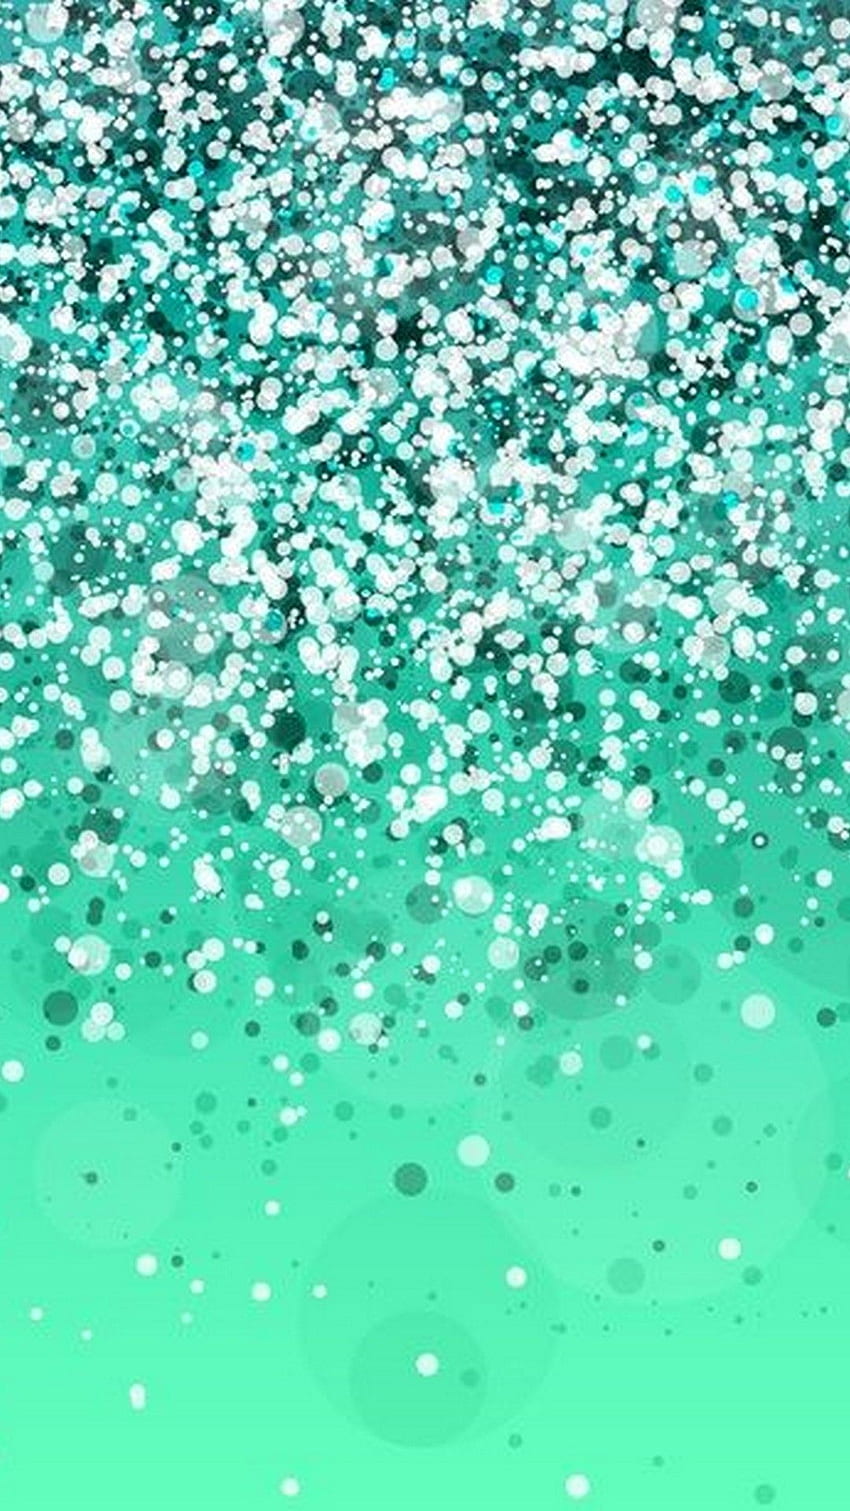 Seafoam Green Pictures | Download Free Images on Unsplash